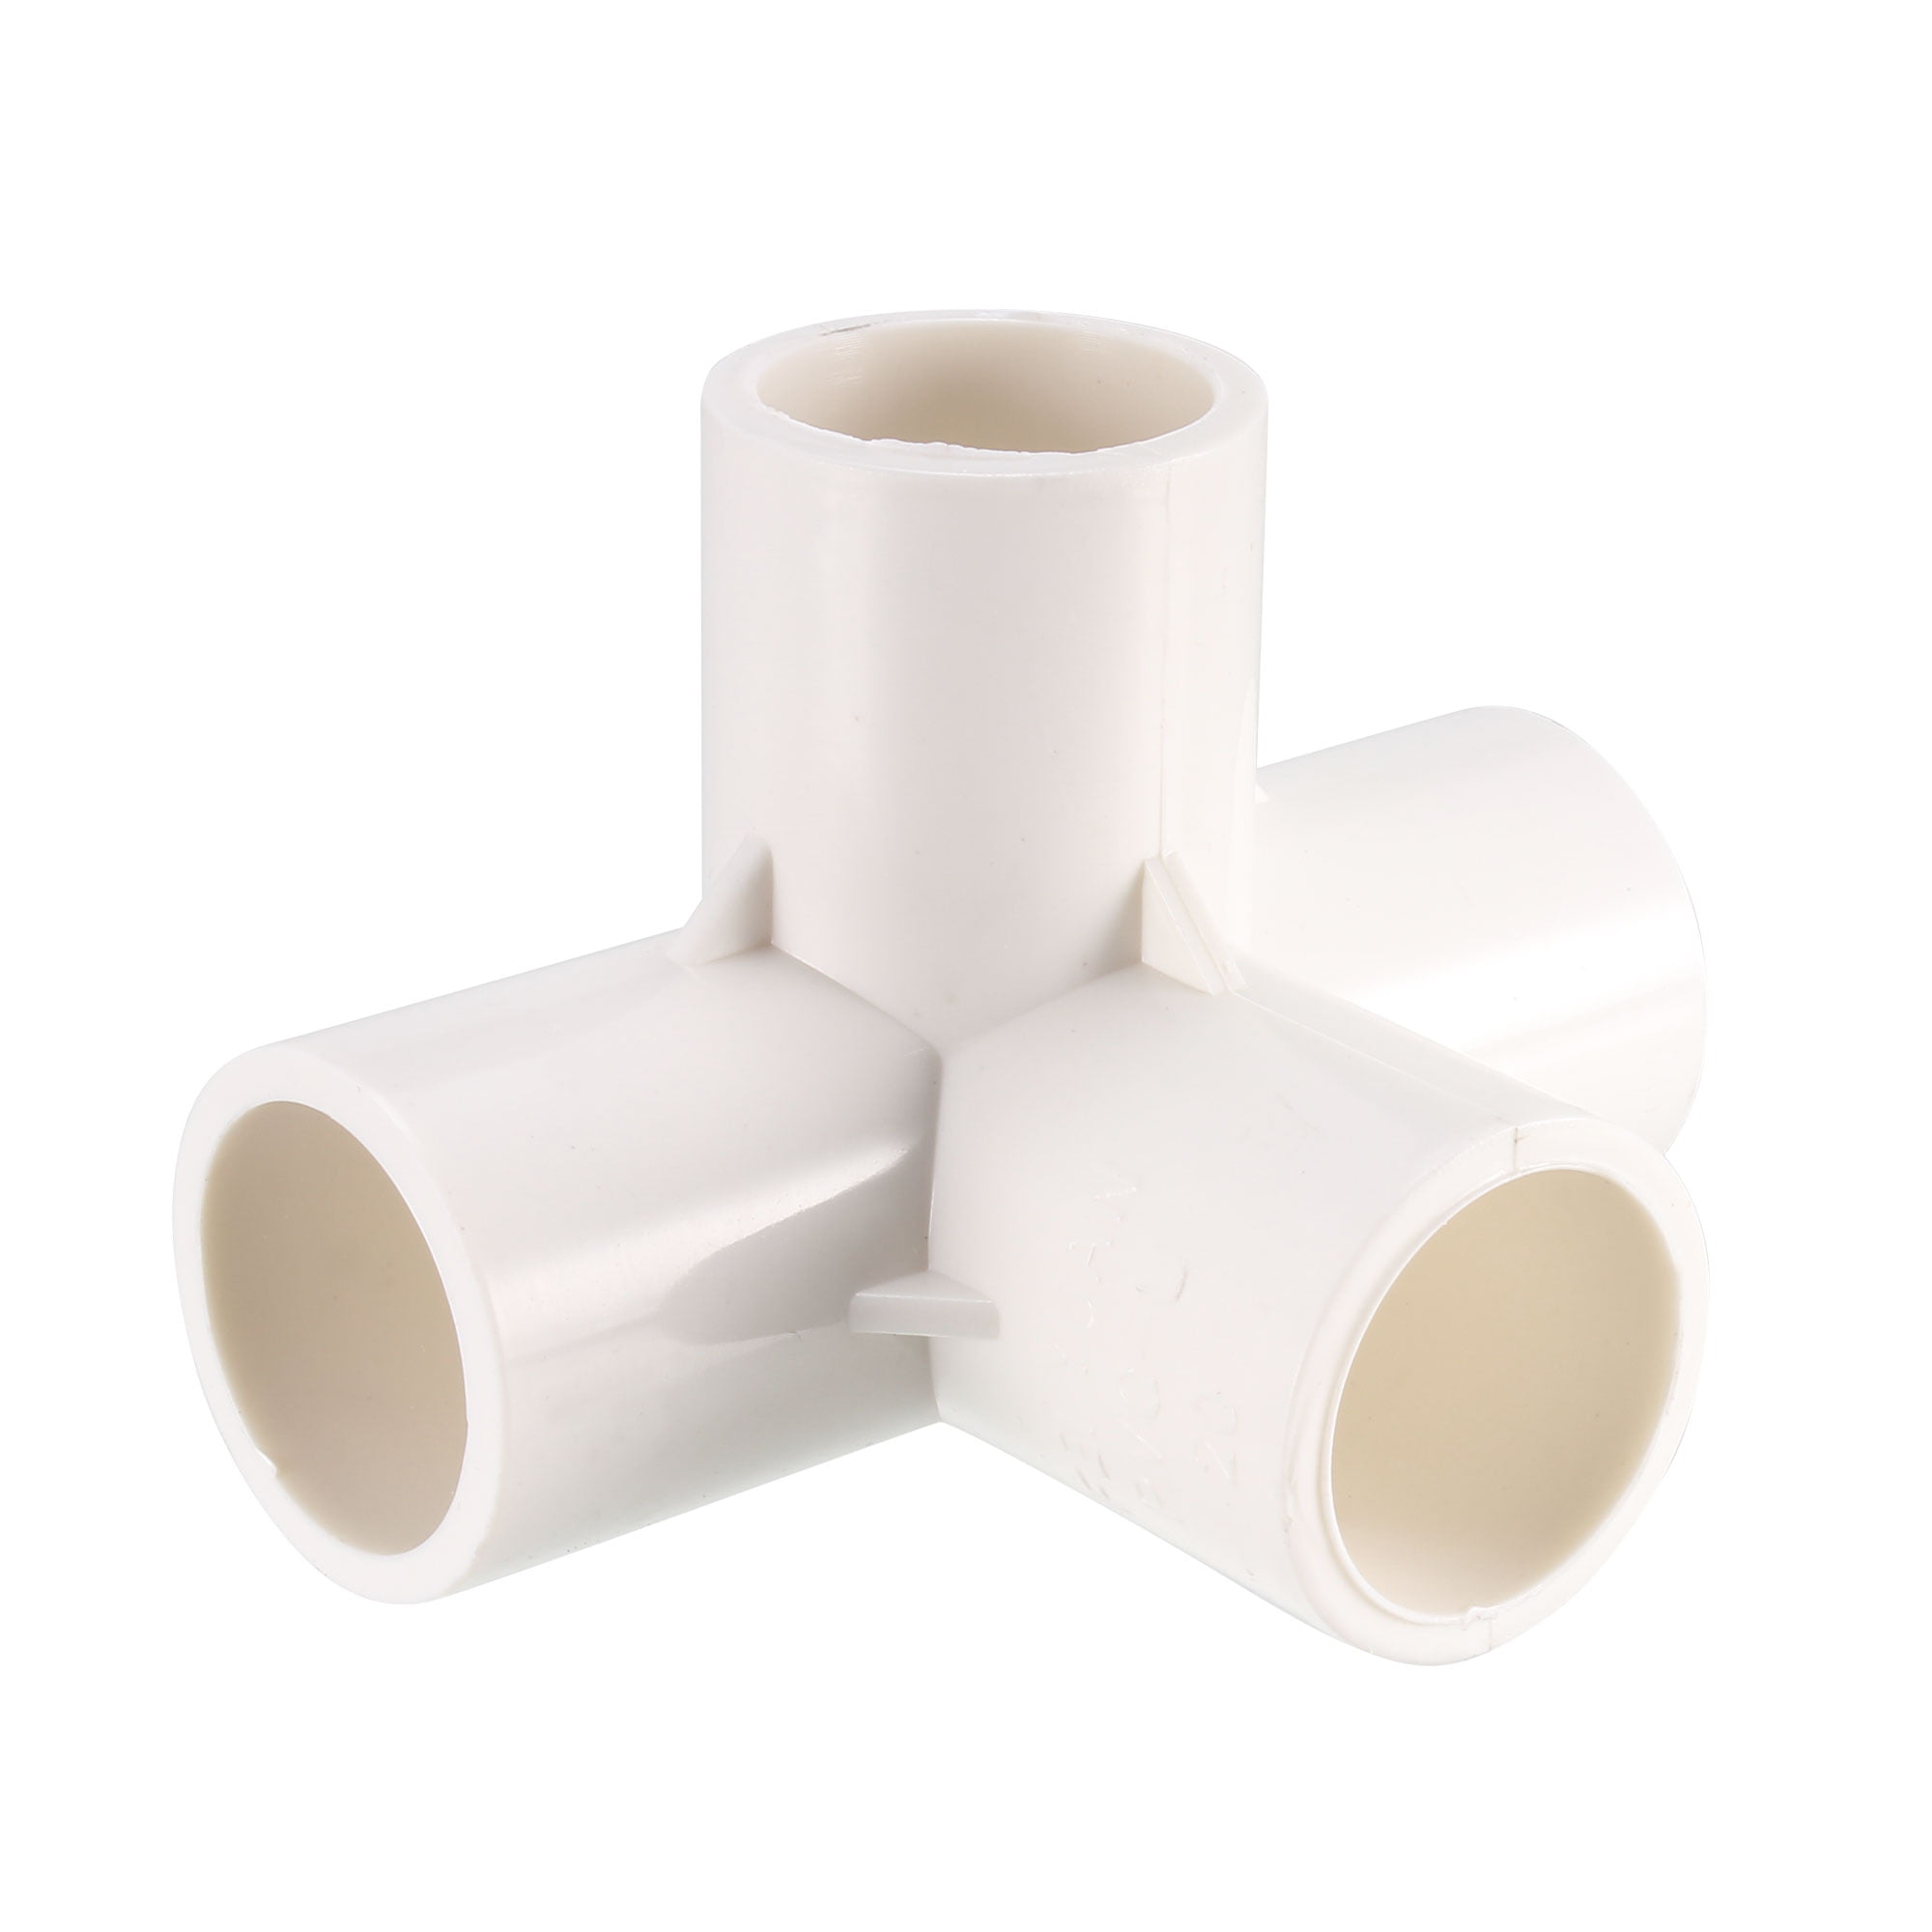 4 Way Elbow PVC Pipe Fitting,Furniture Grade,1/2inch Size Tee Corner